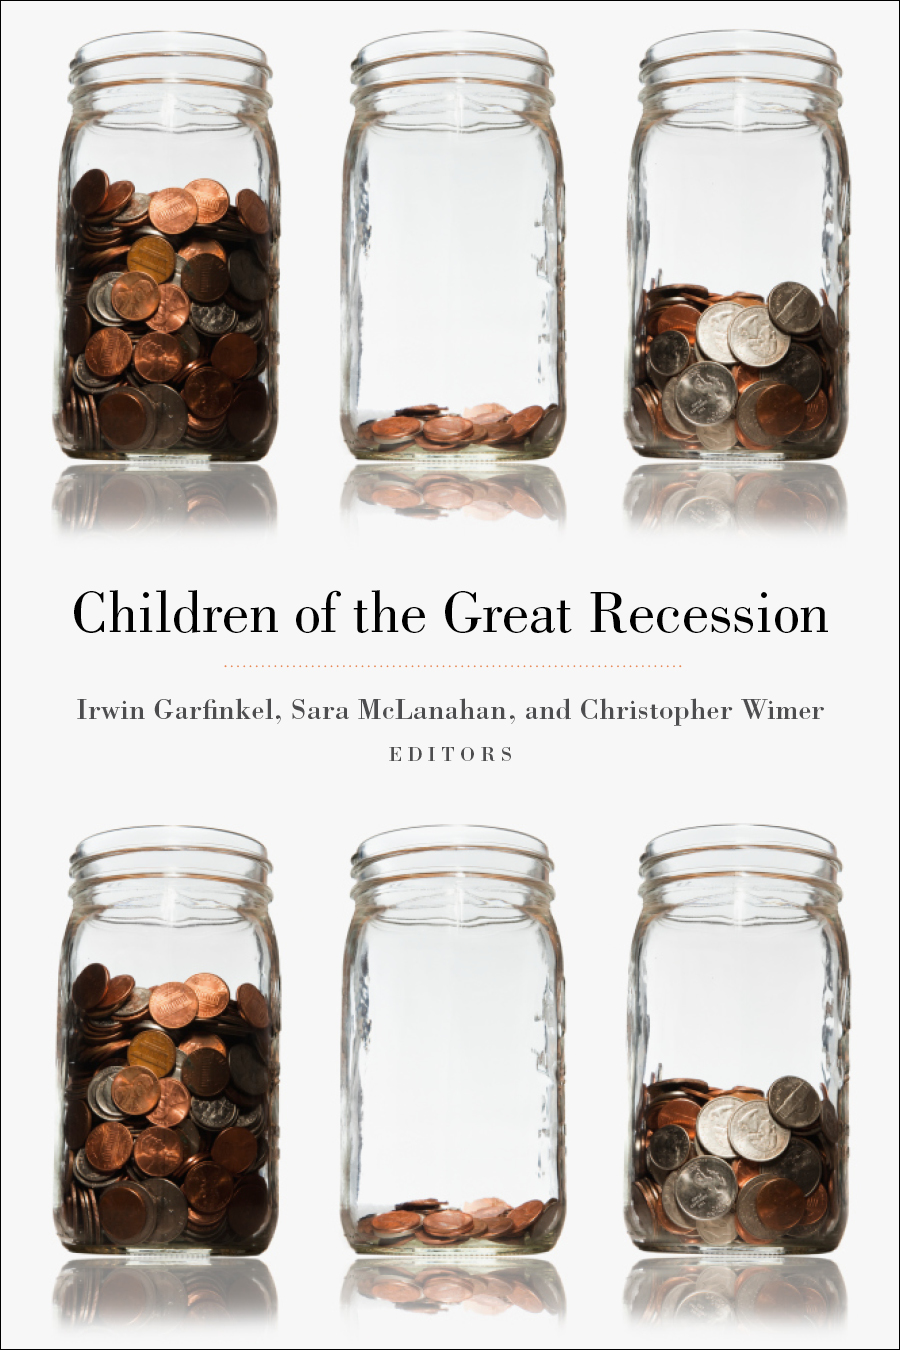 cover for Children of the Great Recession edited by Irwin Garfinkel, Sara McLanahan. Christopher Wimer